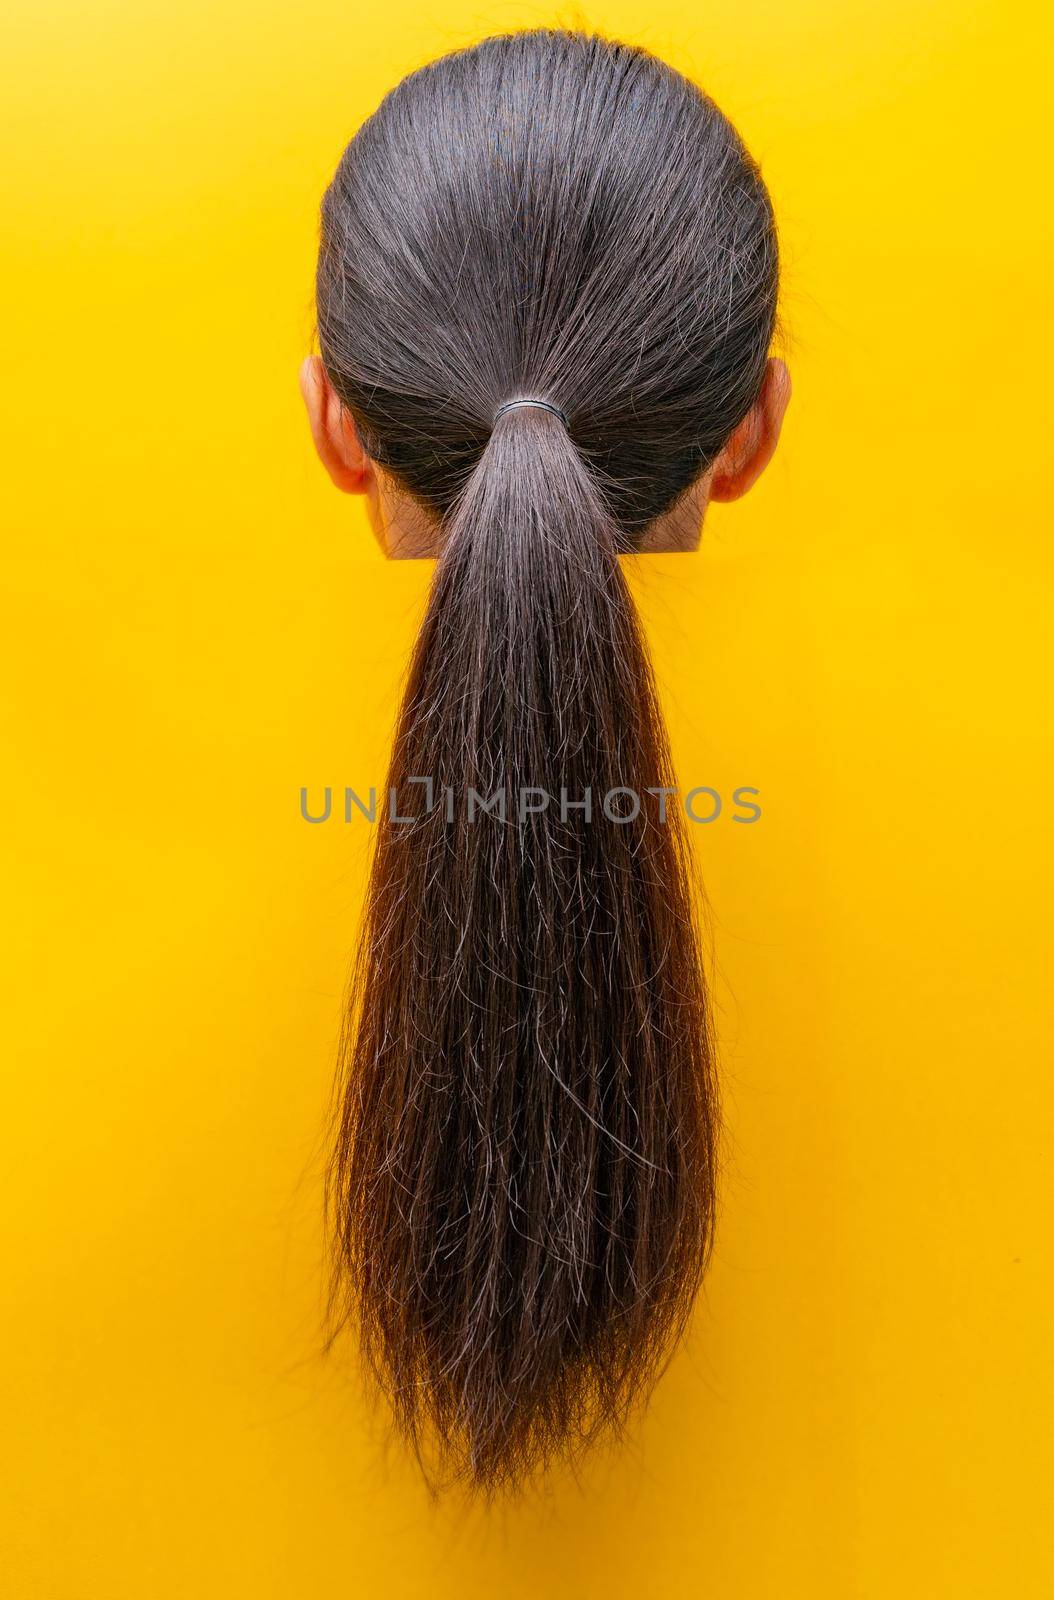 Back view ponytail damaged hair isolated on yellow background. Dry and brittle hair problem. Black long hair with a dry texture. Asian woman with weak, brittle, and unhealthy hair need spa. by Fahroni